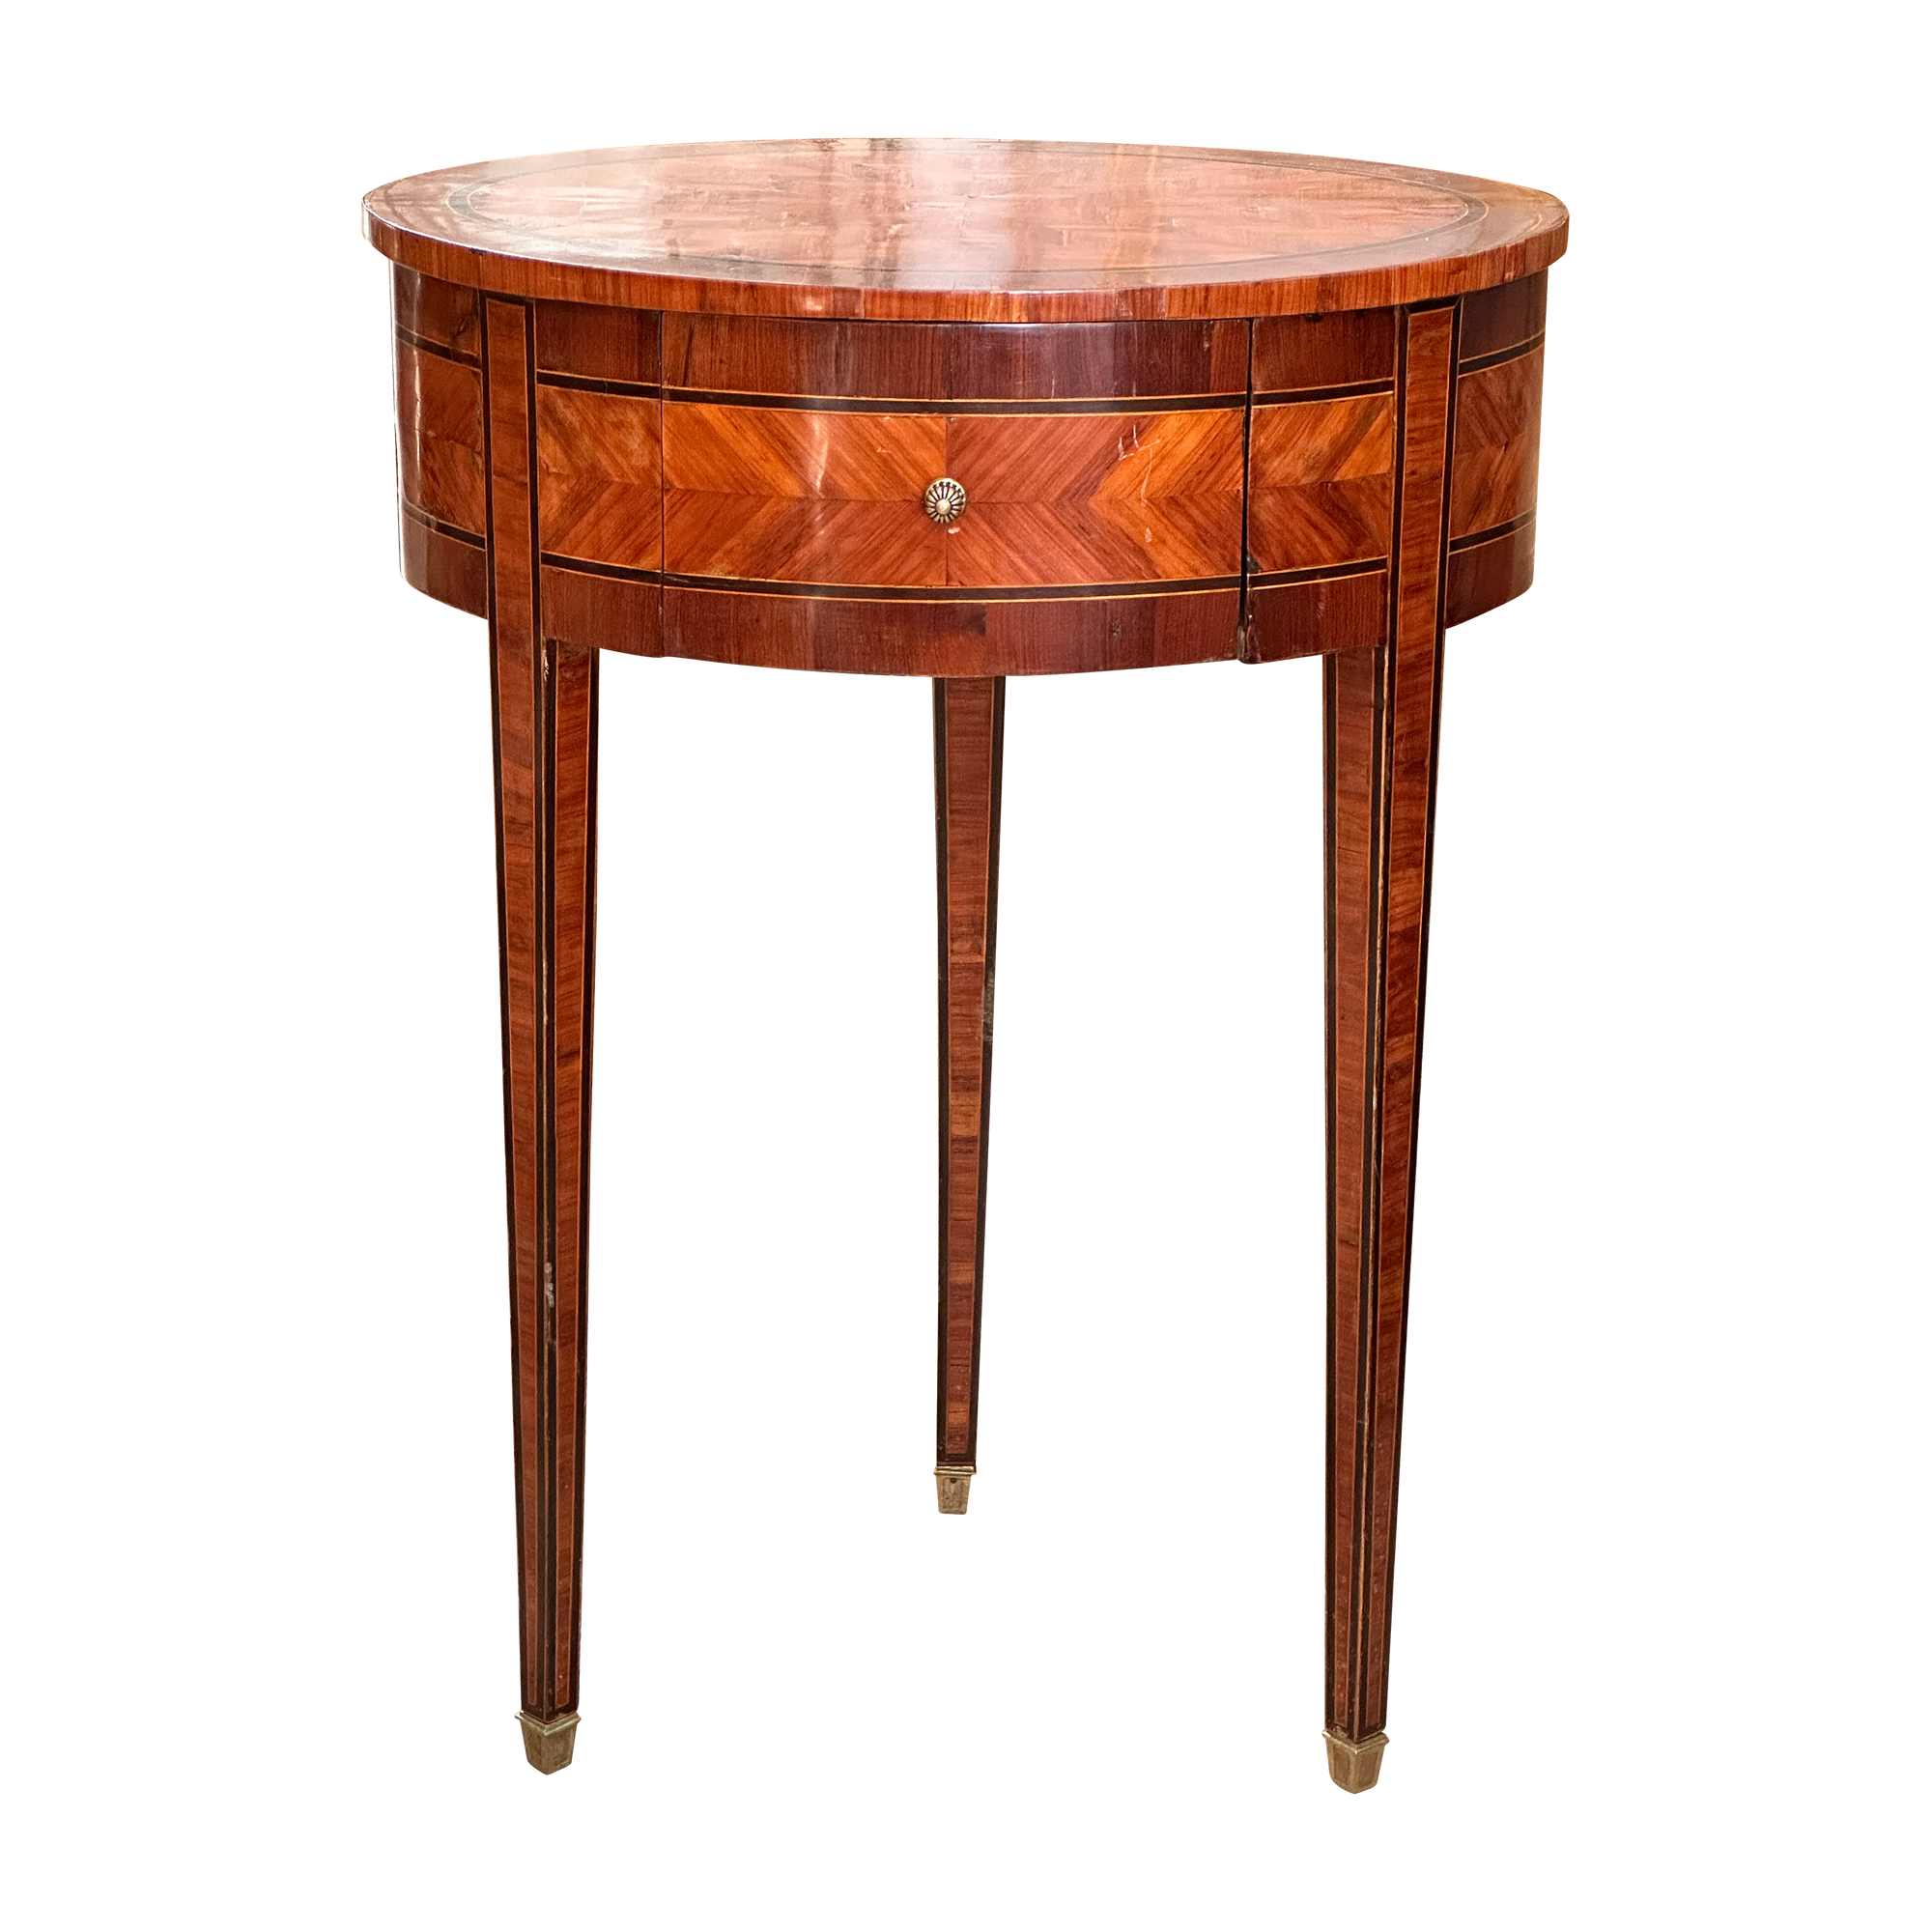 French 19th Century Oval Kingwood Parquetry Inlaid Side Table Bedel & Cie